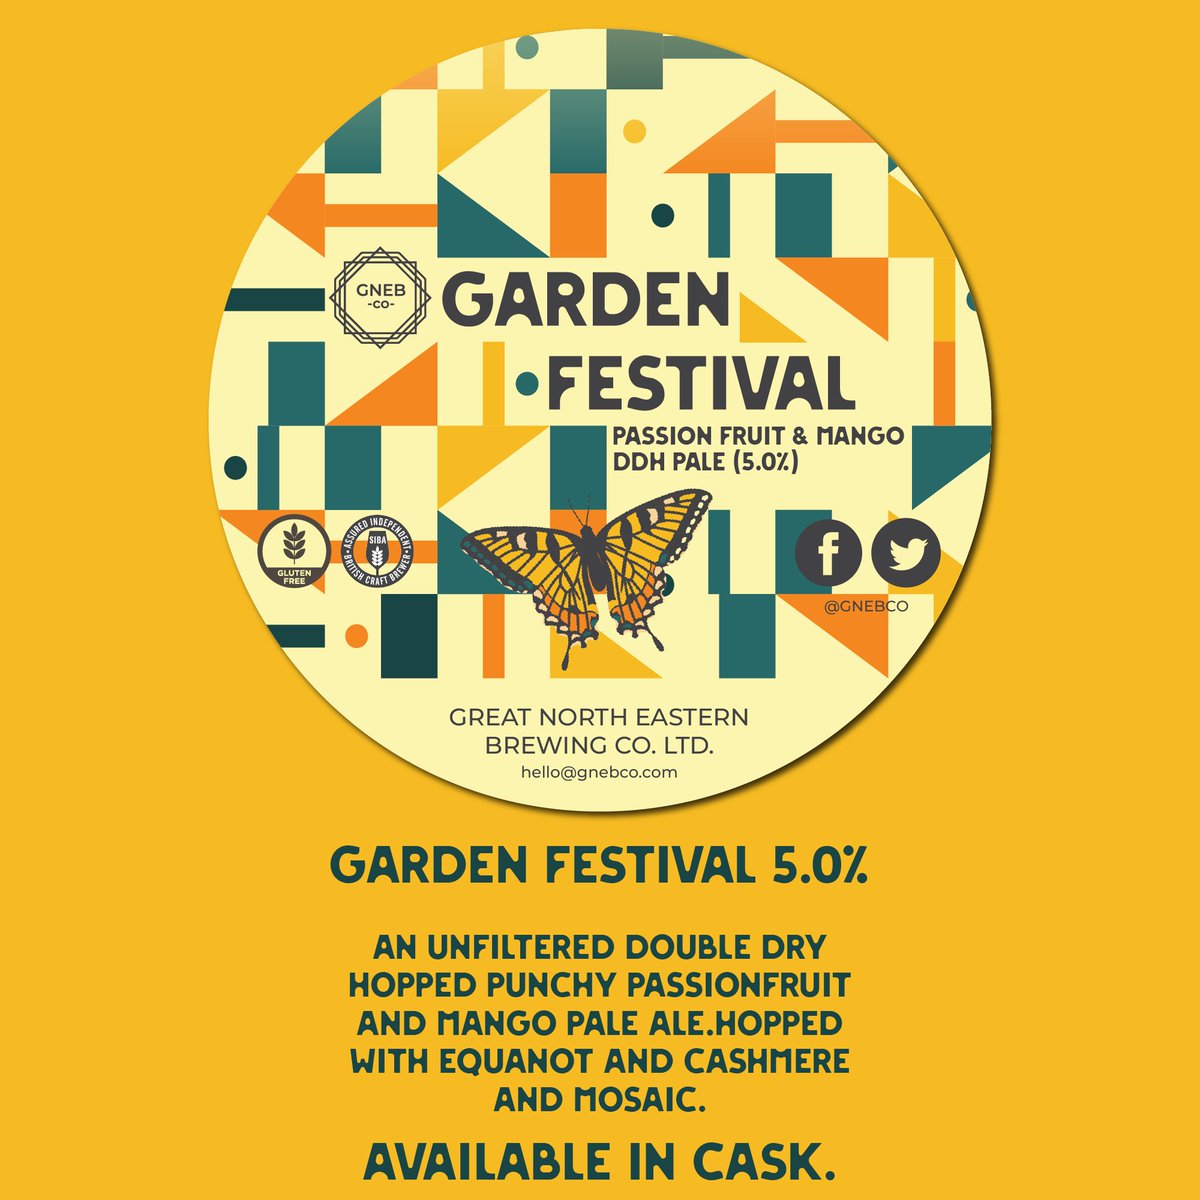 2 tried and tested favourites back in cask this week.... Garden Festival 5.0% is available now and towards the back end of the week we will have one of our flagship beers 'Styrian Blonde' available again. As always, trade enquiries: 01914474462 or hello@gnebco.com